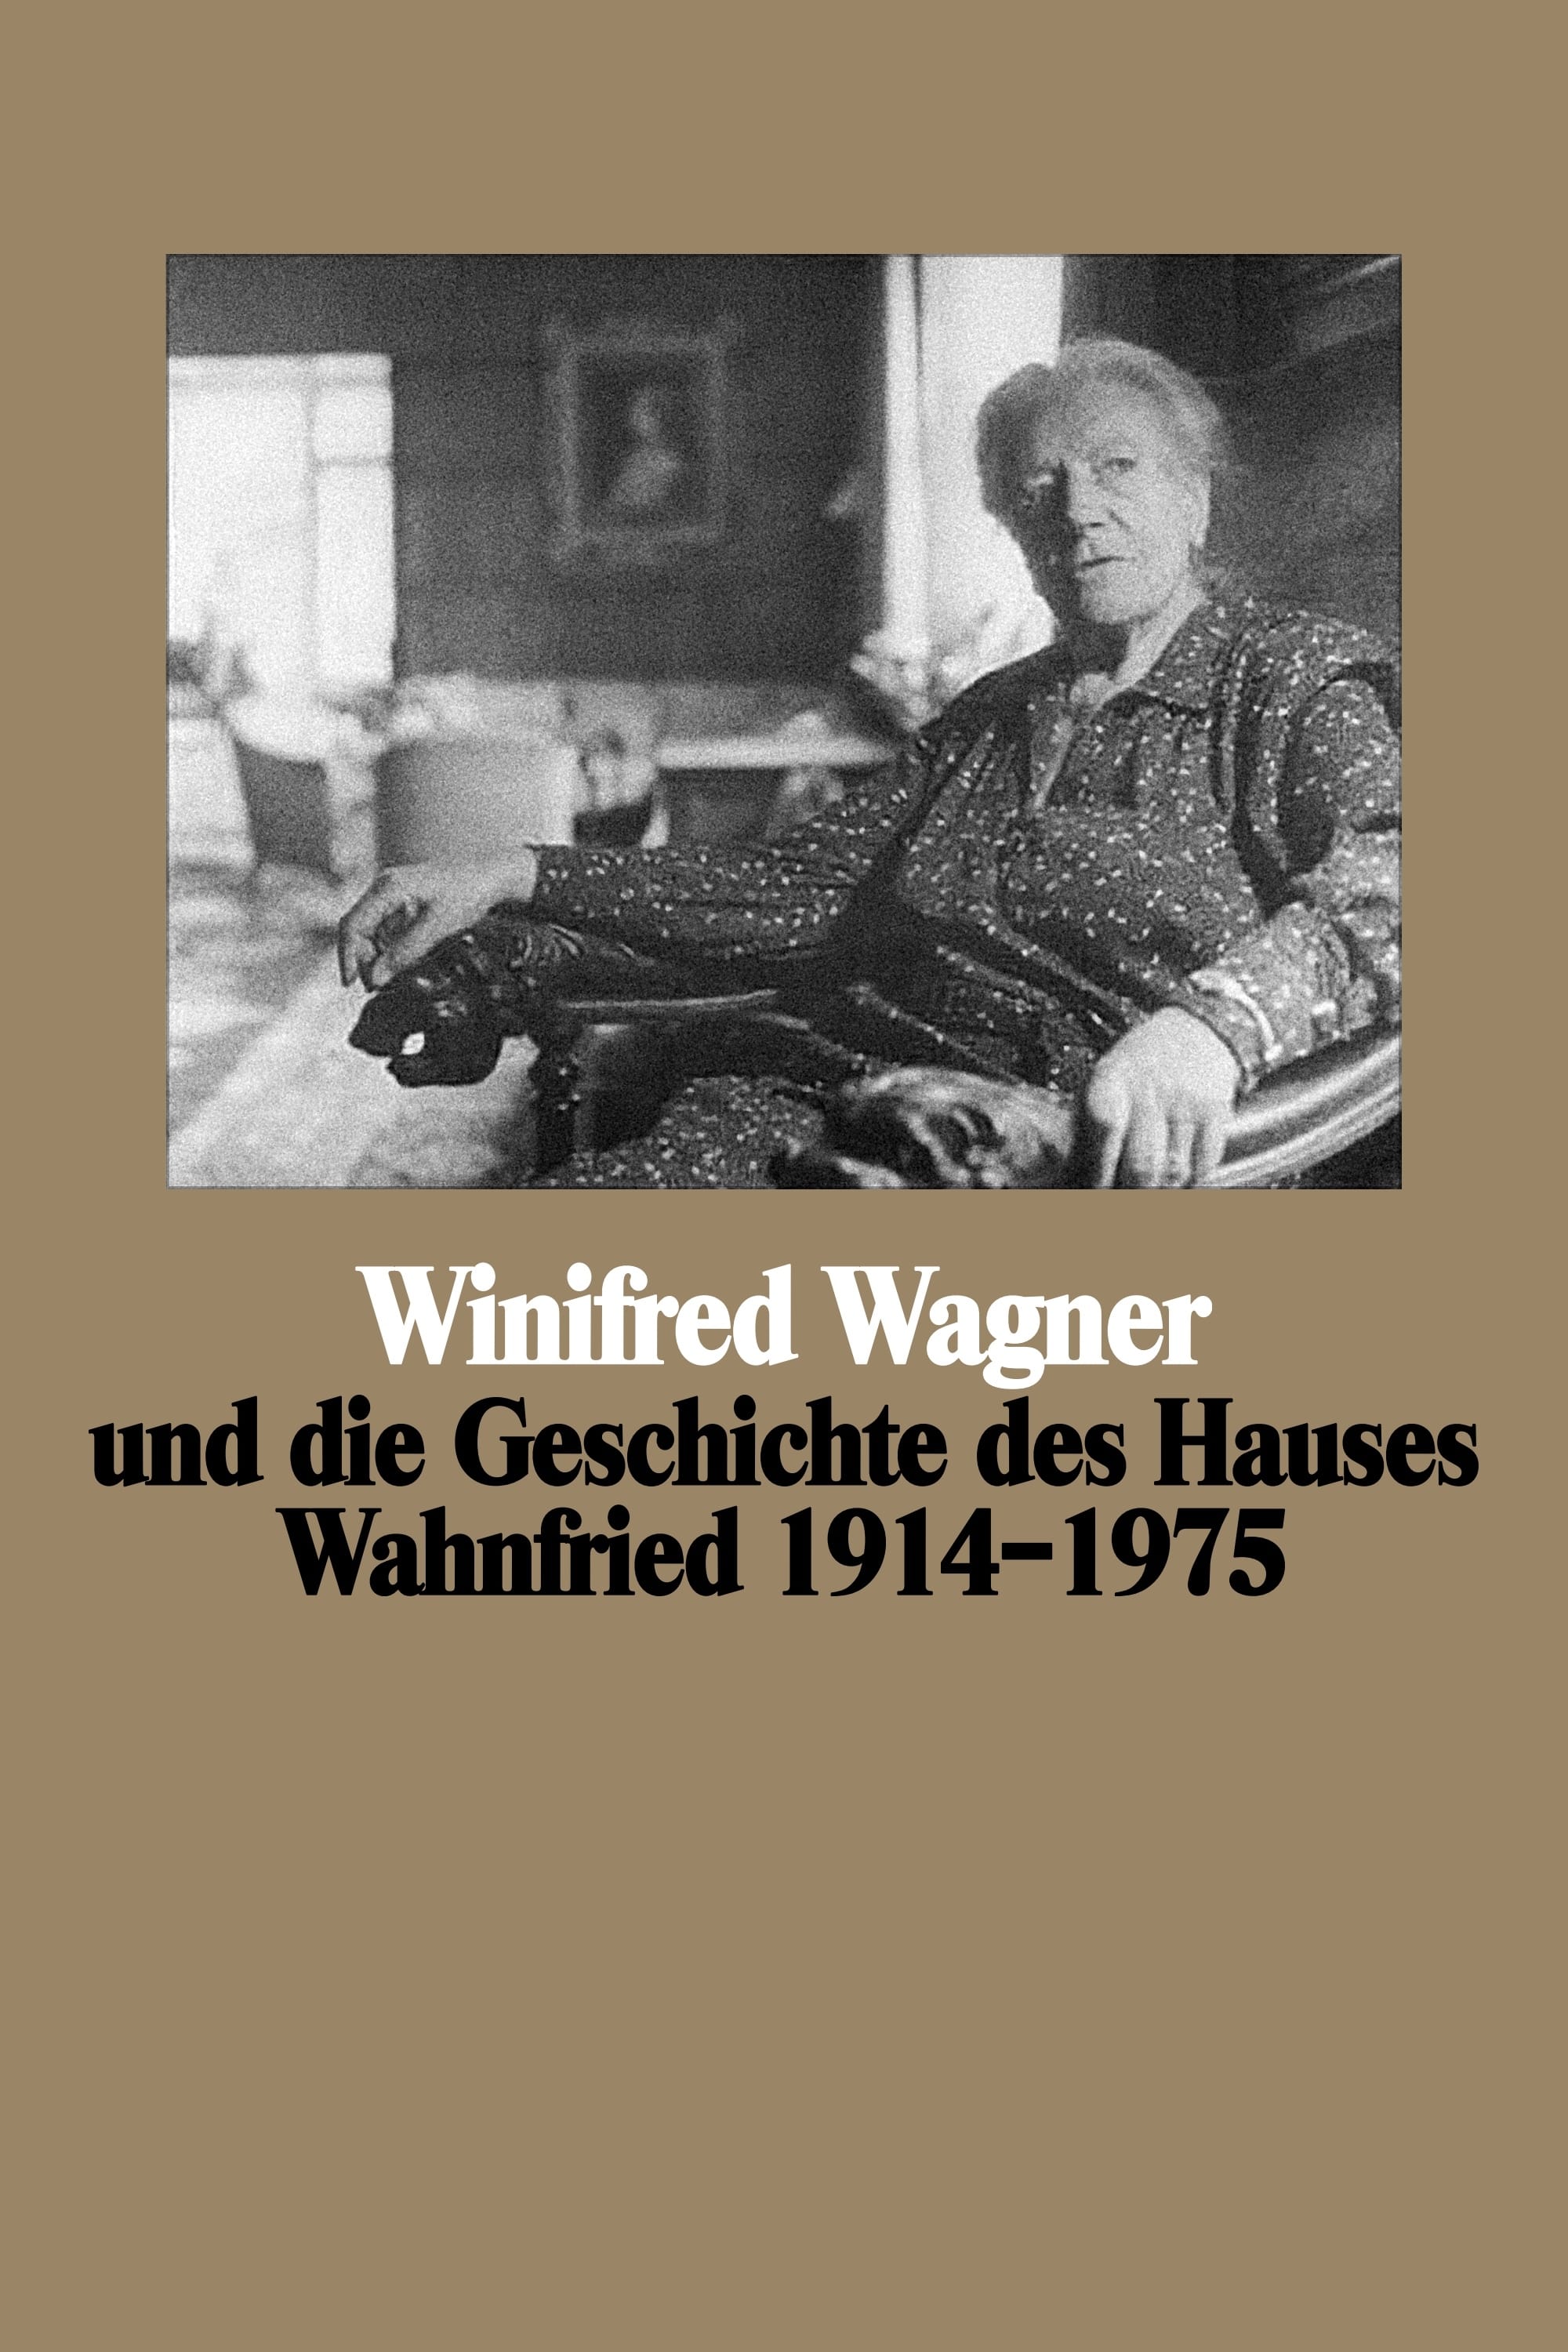 The Confessions of Winifred Wagner